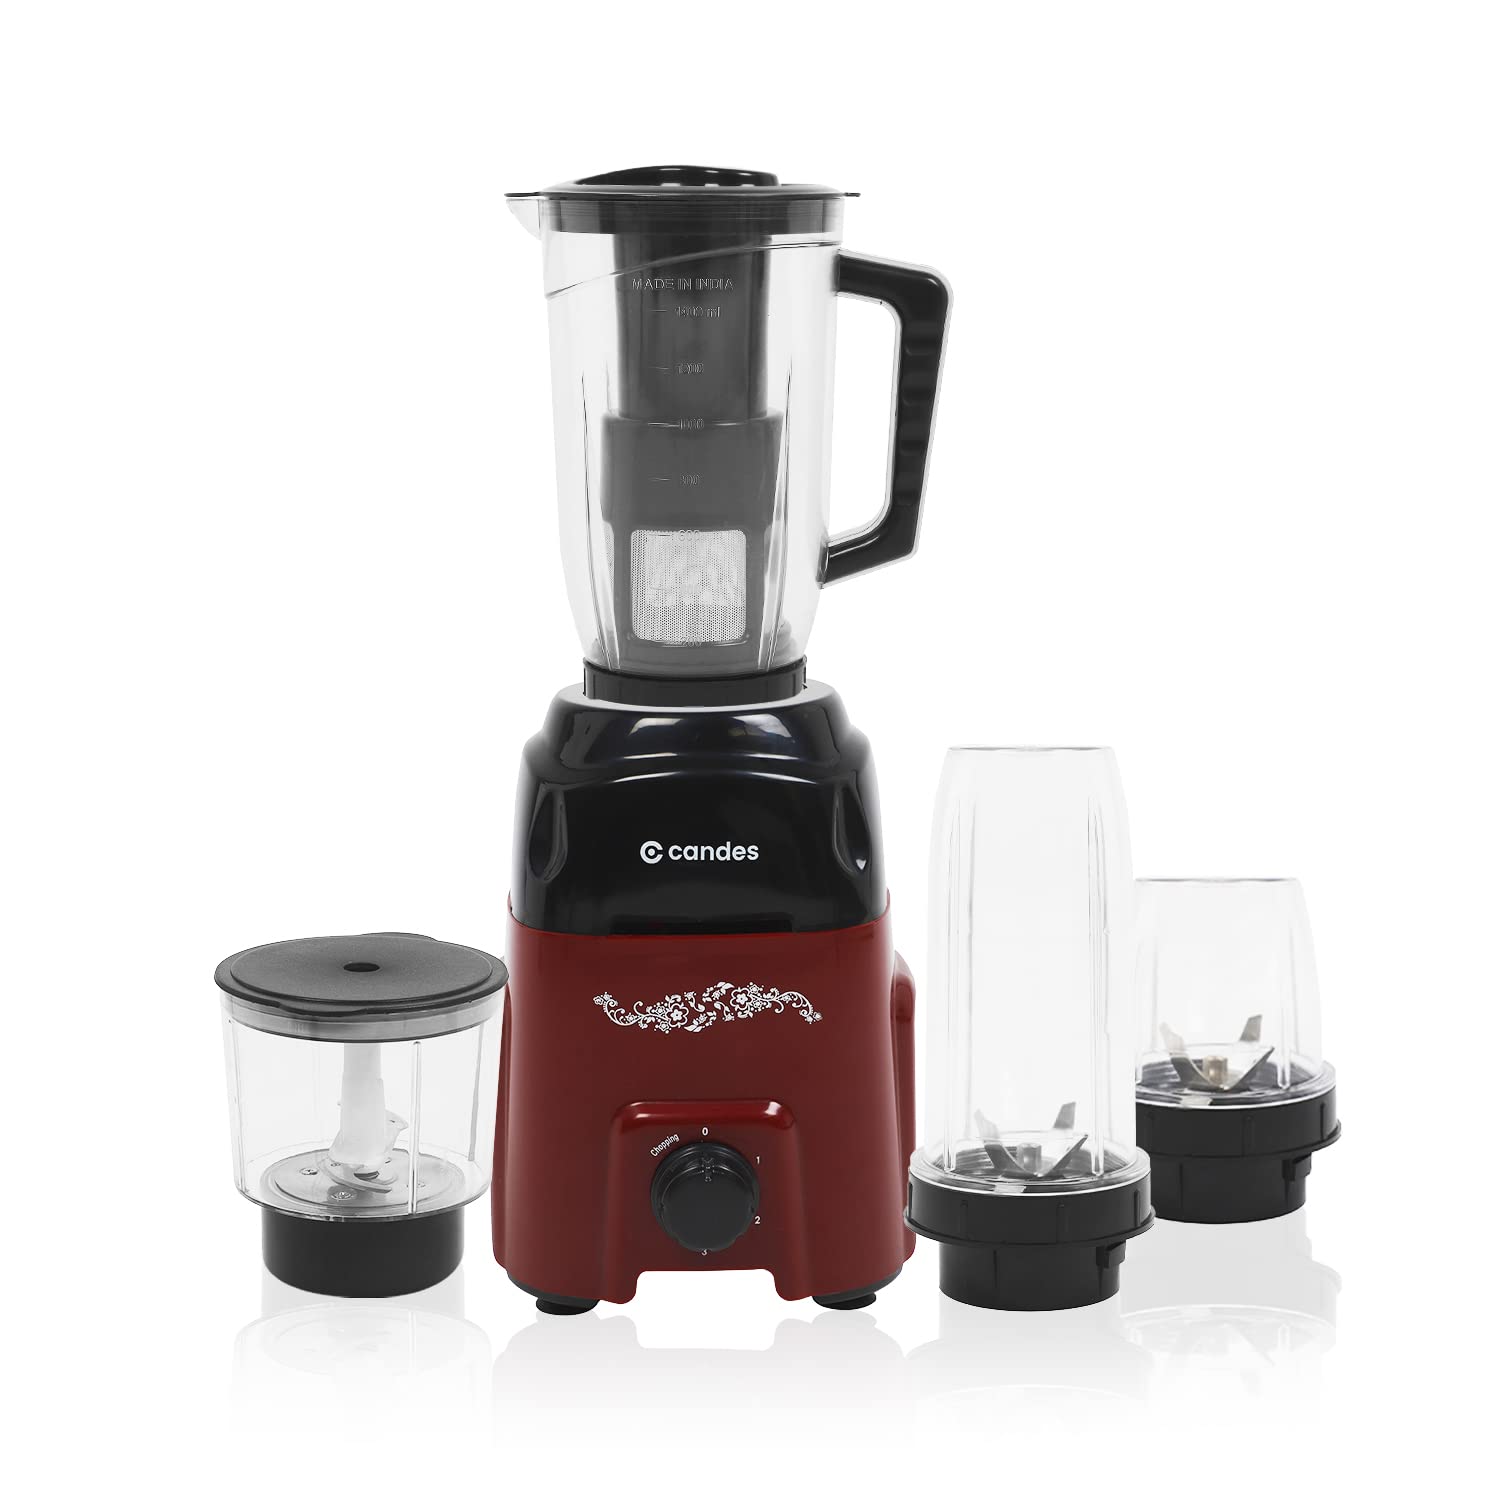 Candes Pearl 600 W Mixer Grinder 4 Jars - Black, Red (1 Year Warranty + 2 Year on Motor Only)